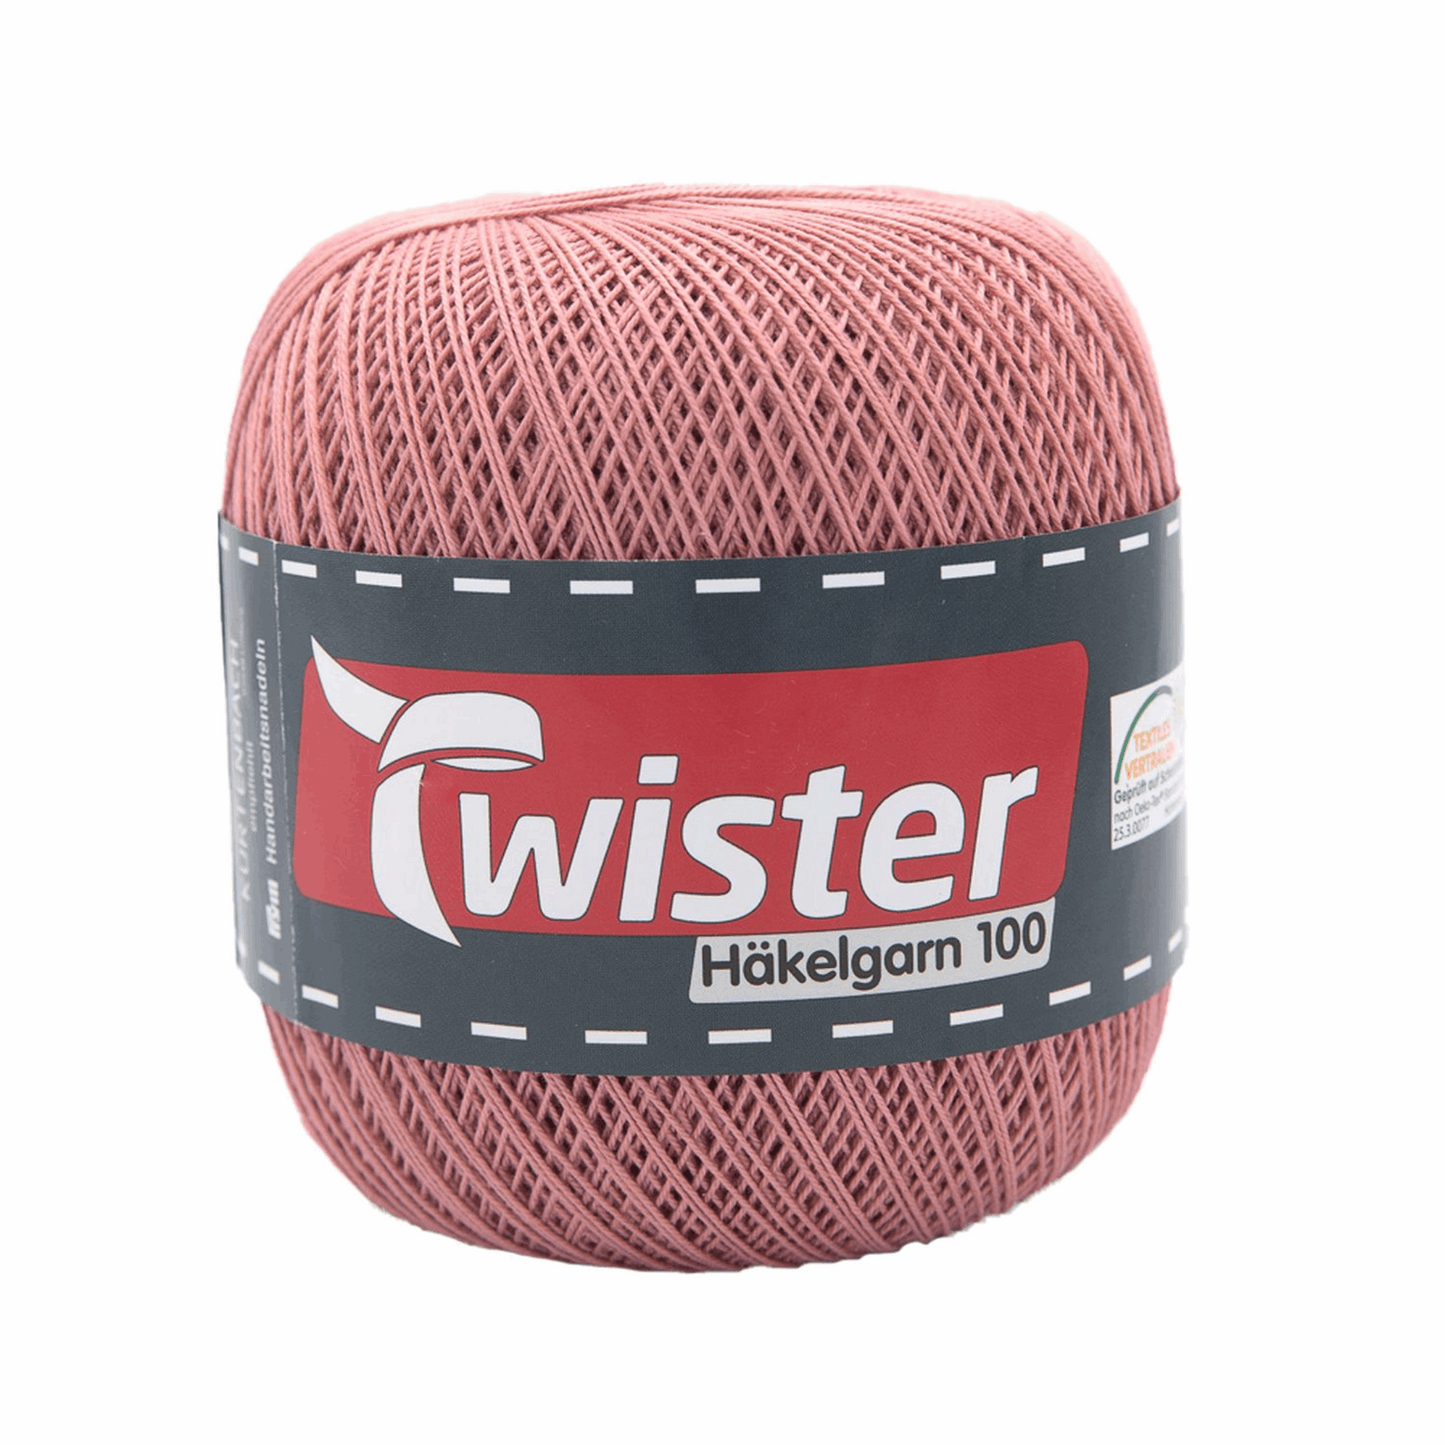 Twister crochet yarn, 100g, 98303, color old pink 33